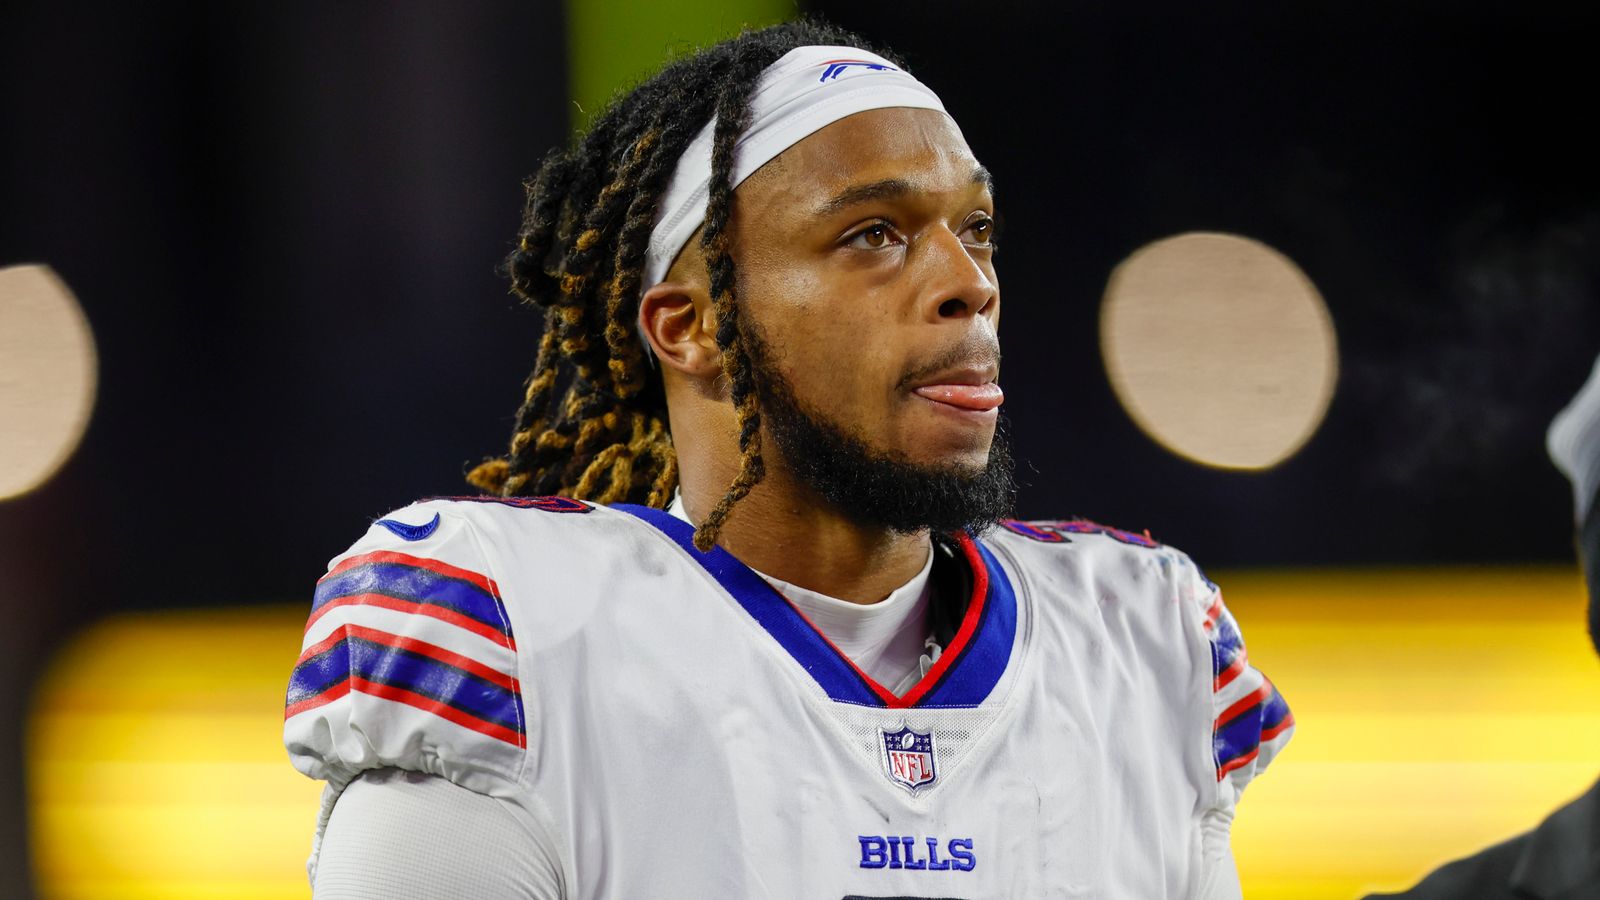 Damar Hamlin: Phoebe Schecter reacts to Buffalo Bills player’s cardiac arrest and gives insight into the team’s strength in adversity